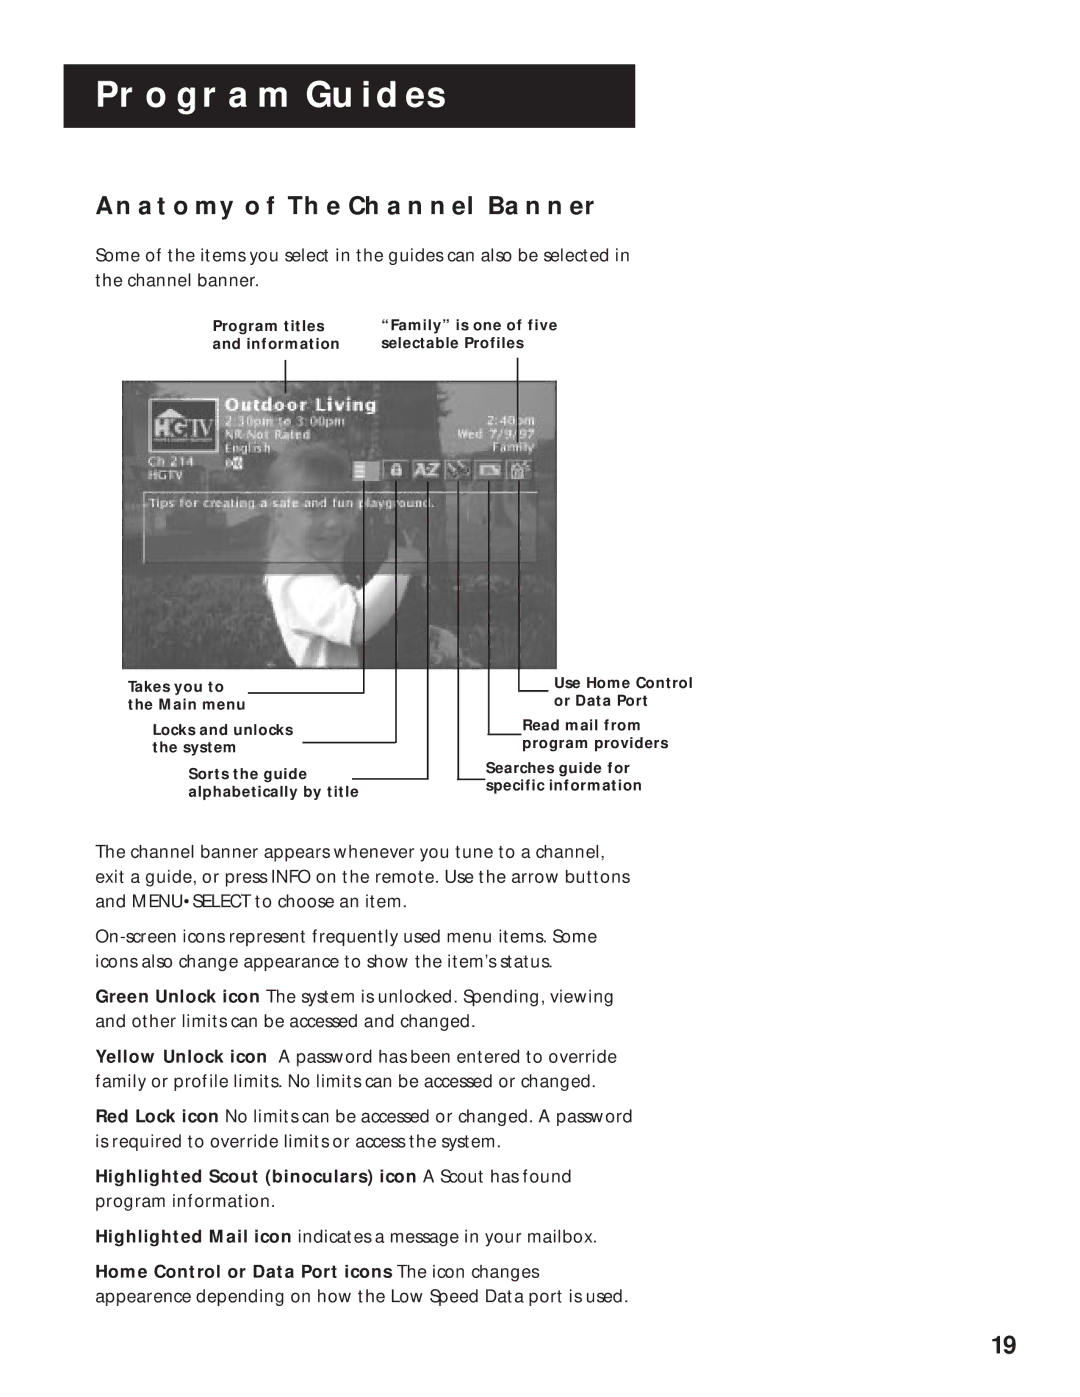 RCA DRD202RA manual Anatomy of the Channel Banner 